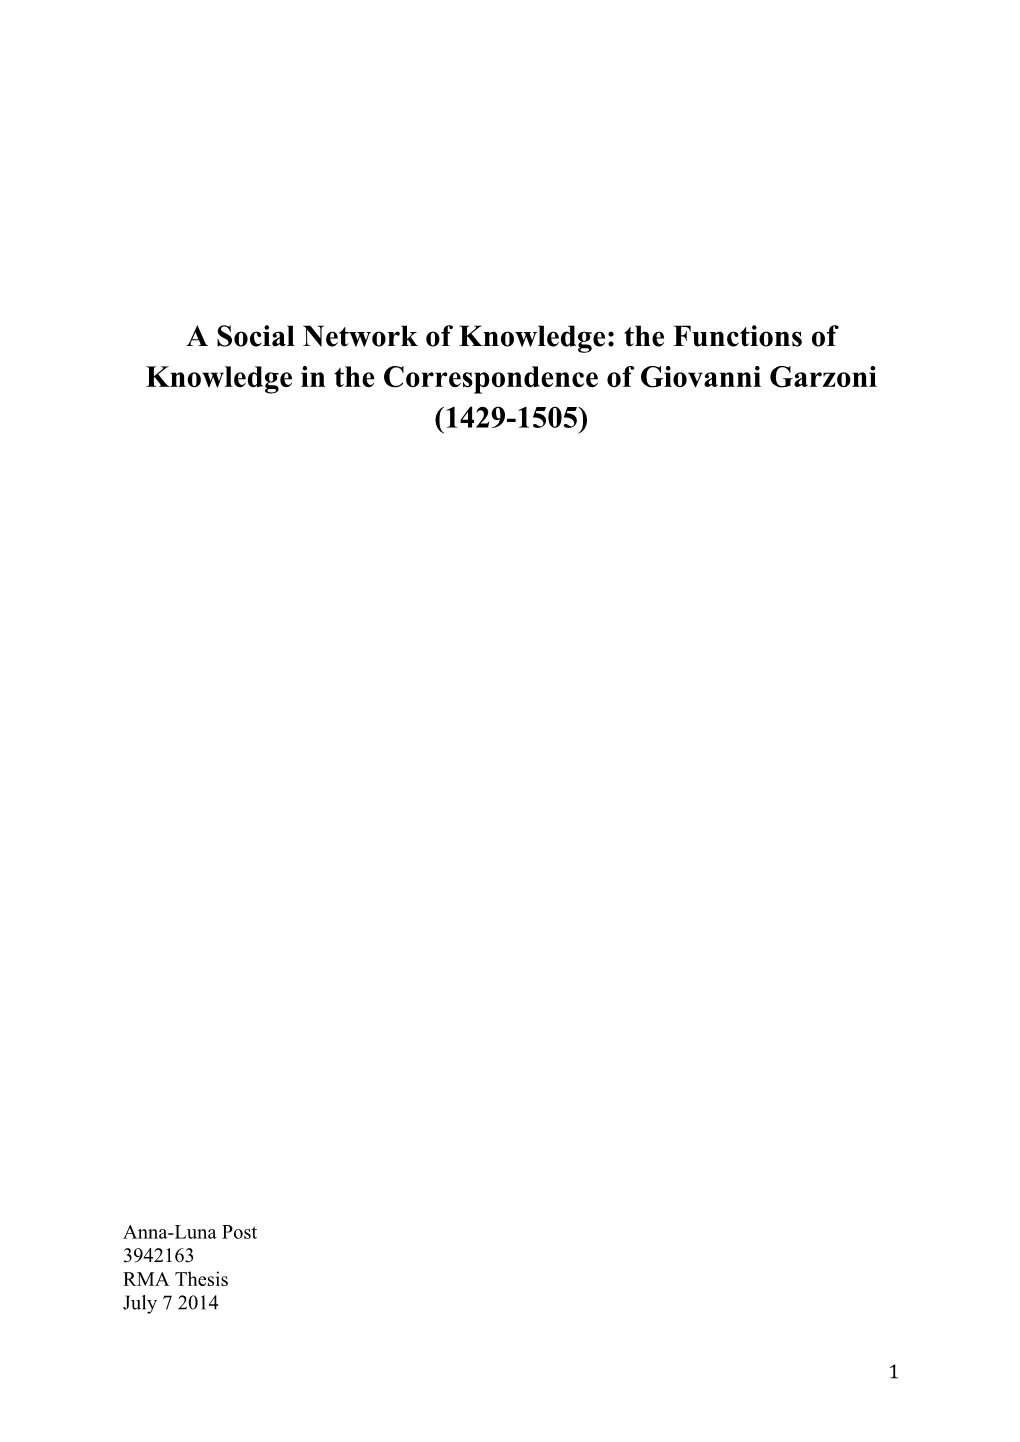 A Social Network of Knowledge: the Functions of Knowledge in the Correspondence of Giovanni Garzoni (1429-1505)